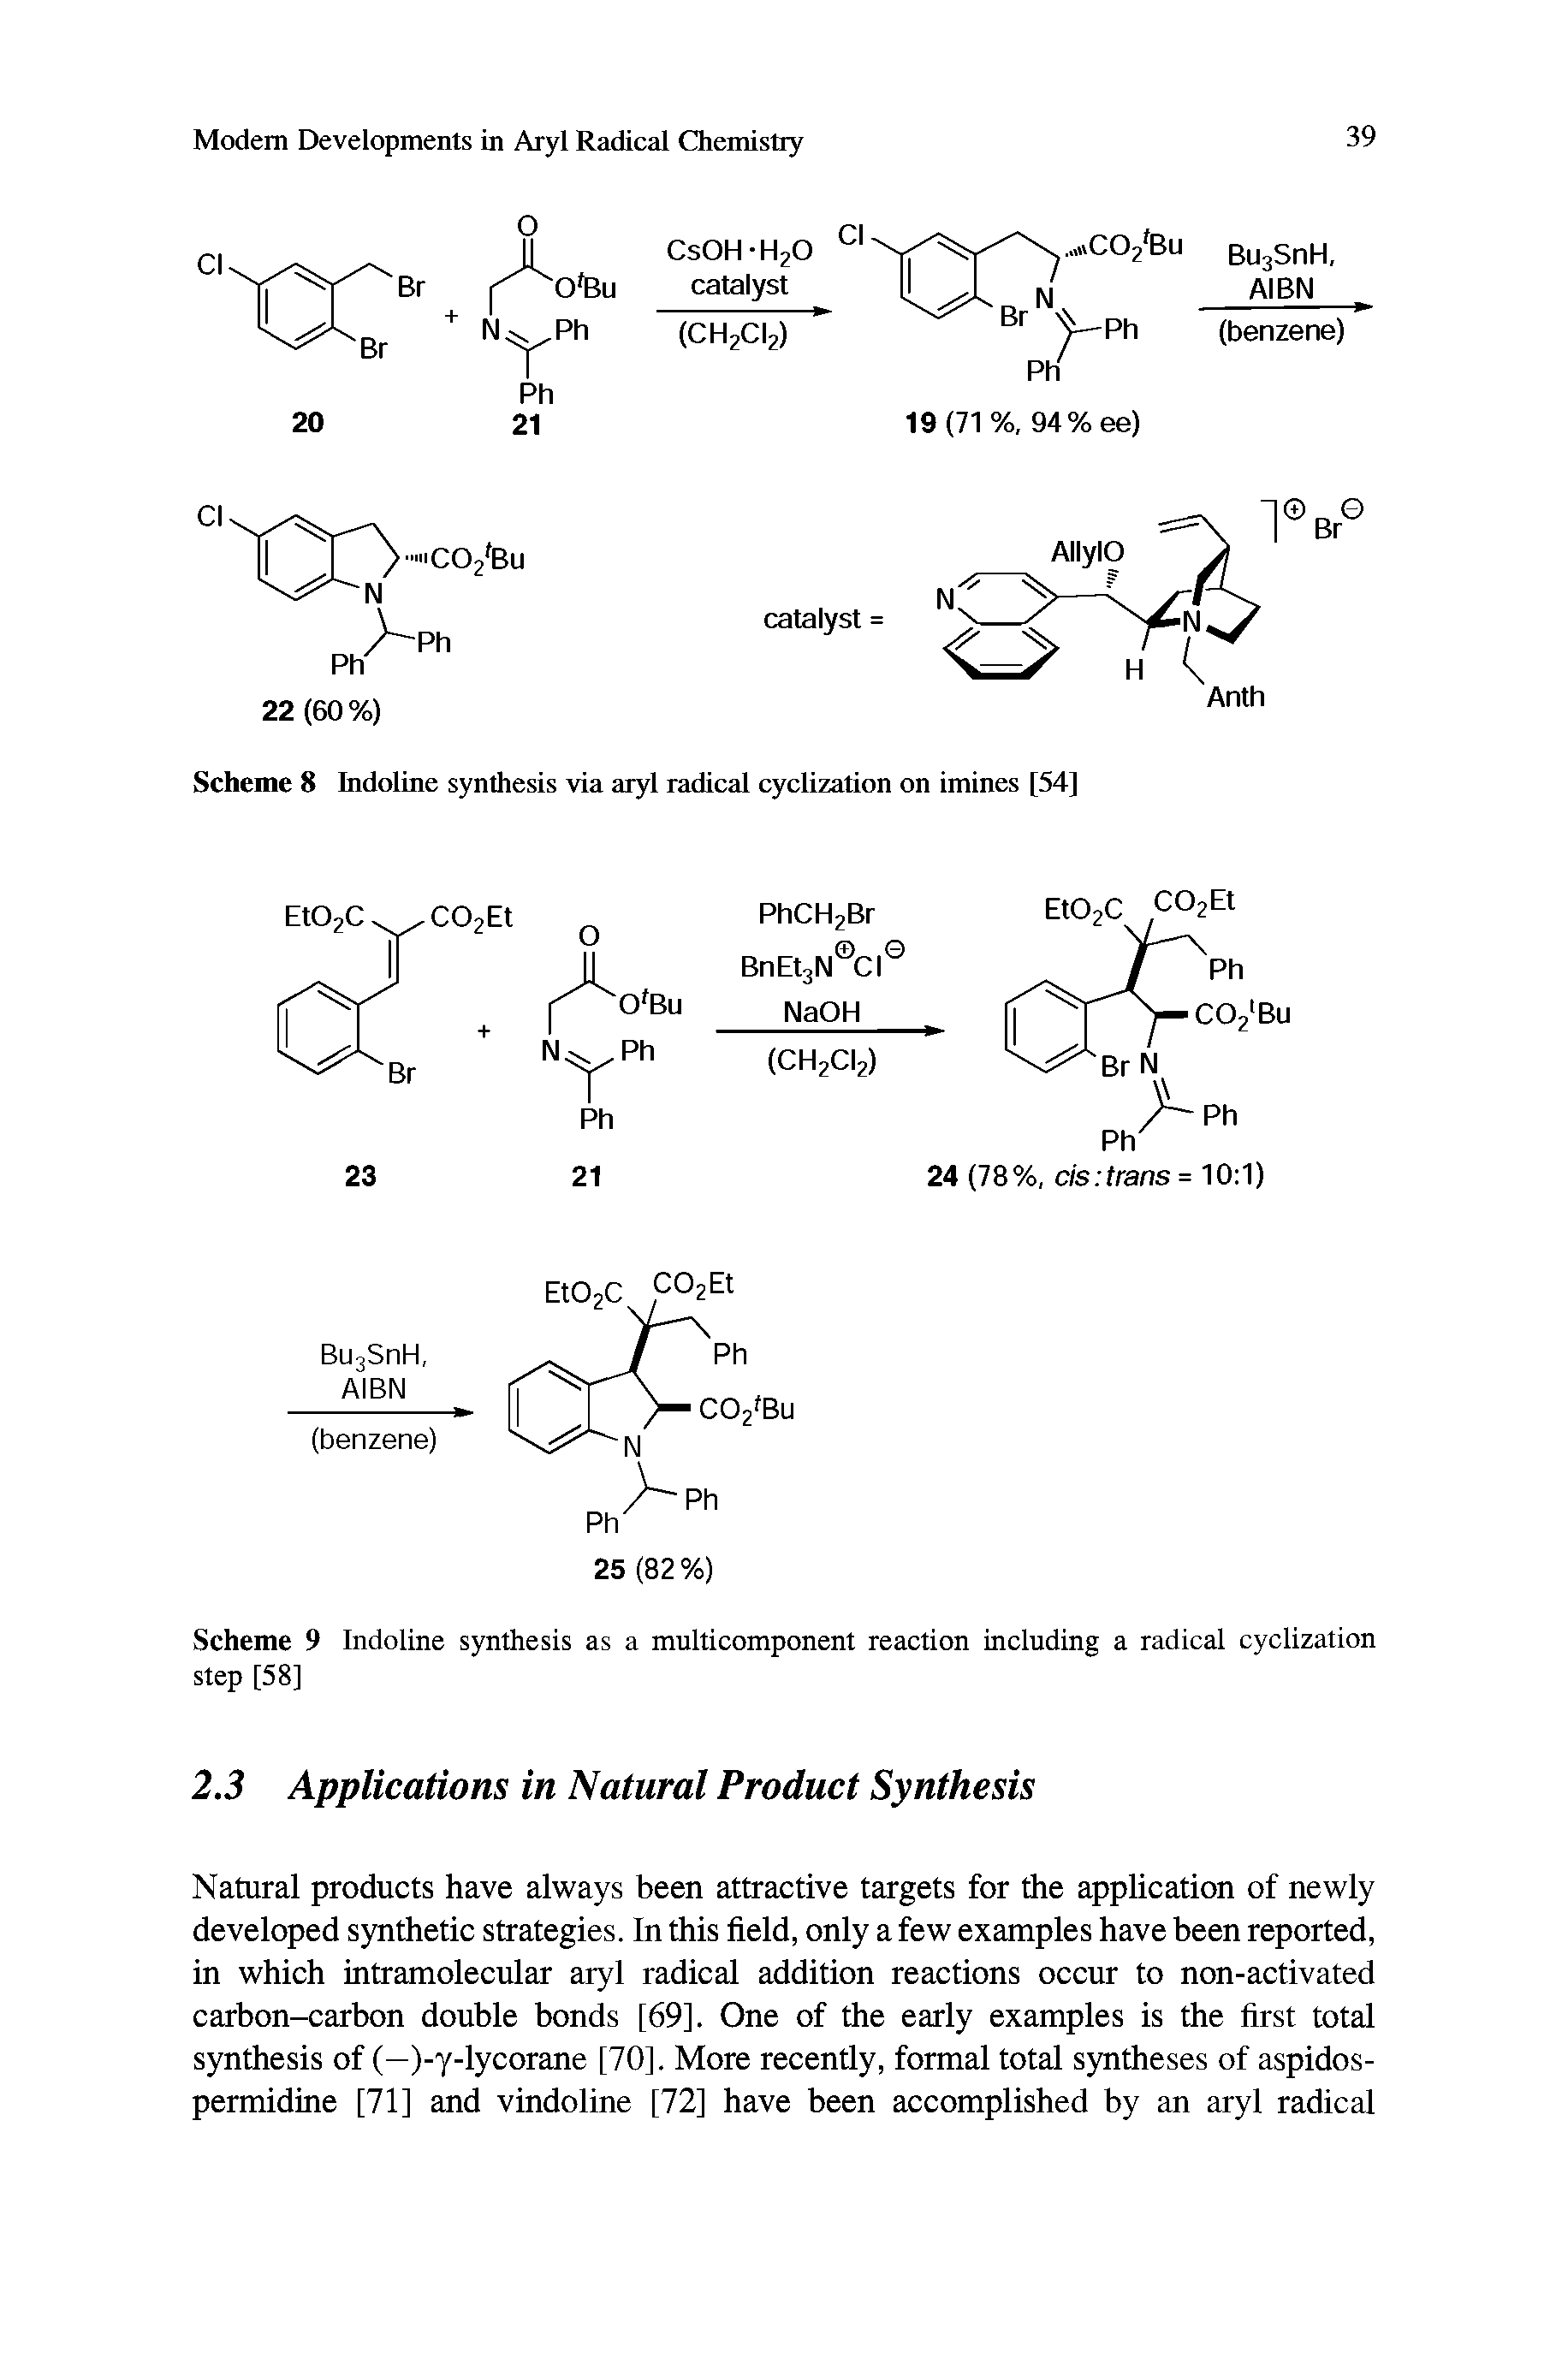 Scheme 9 Indoline synthesis as a multicomponent reaction including a radical cyclization step [58]...